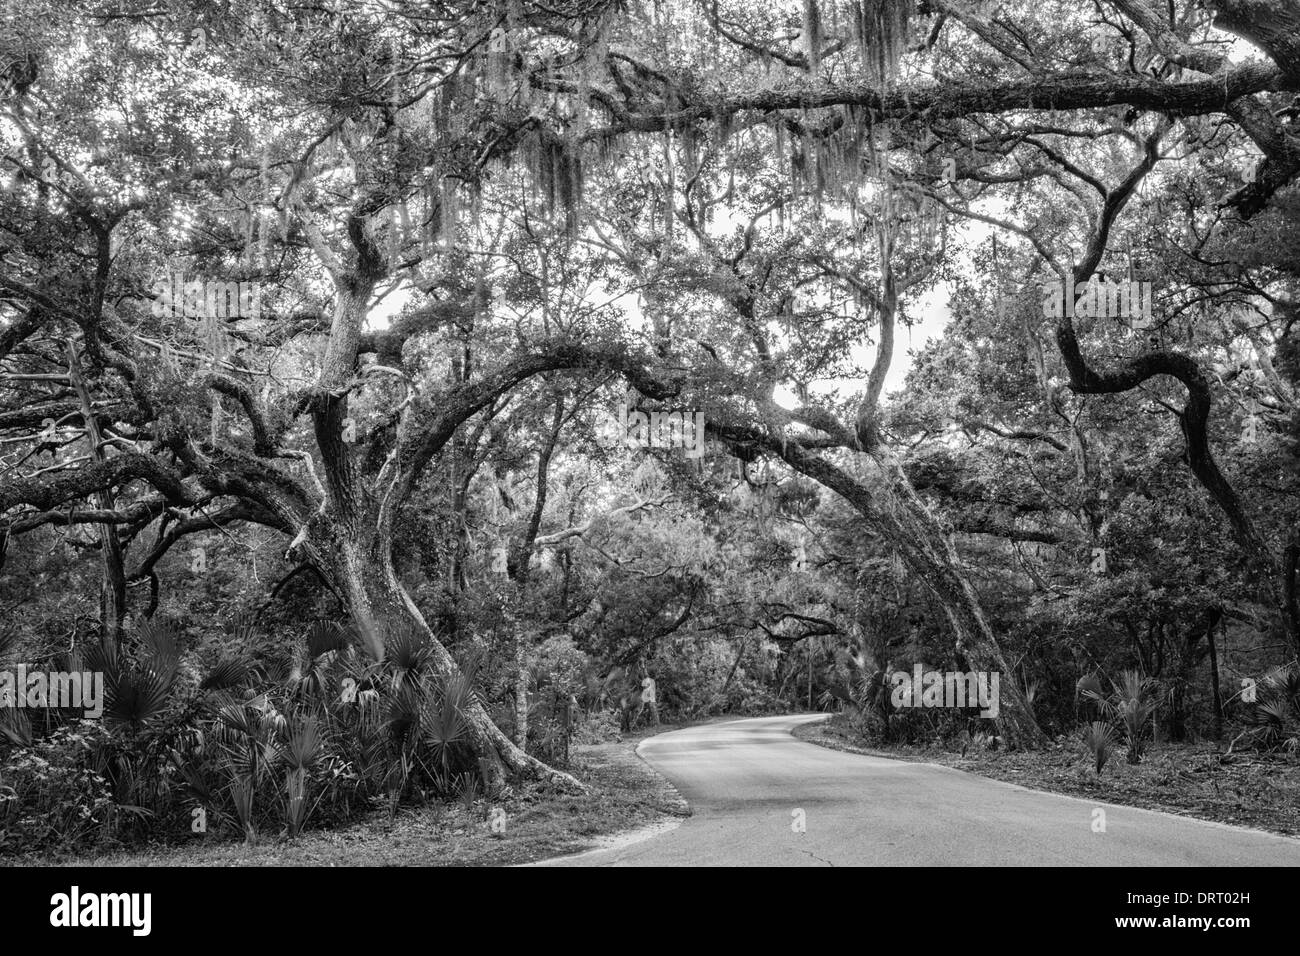 Twisted old live oak trees (Quercus virginiana) arc over a road in Fort Clinch State Park, Florida converted to black and white. Stock Photo